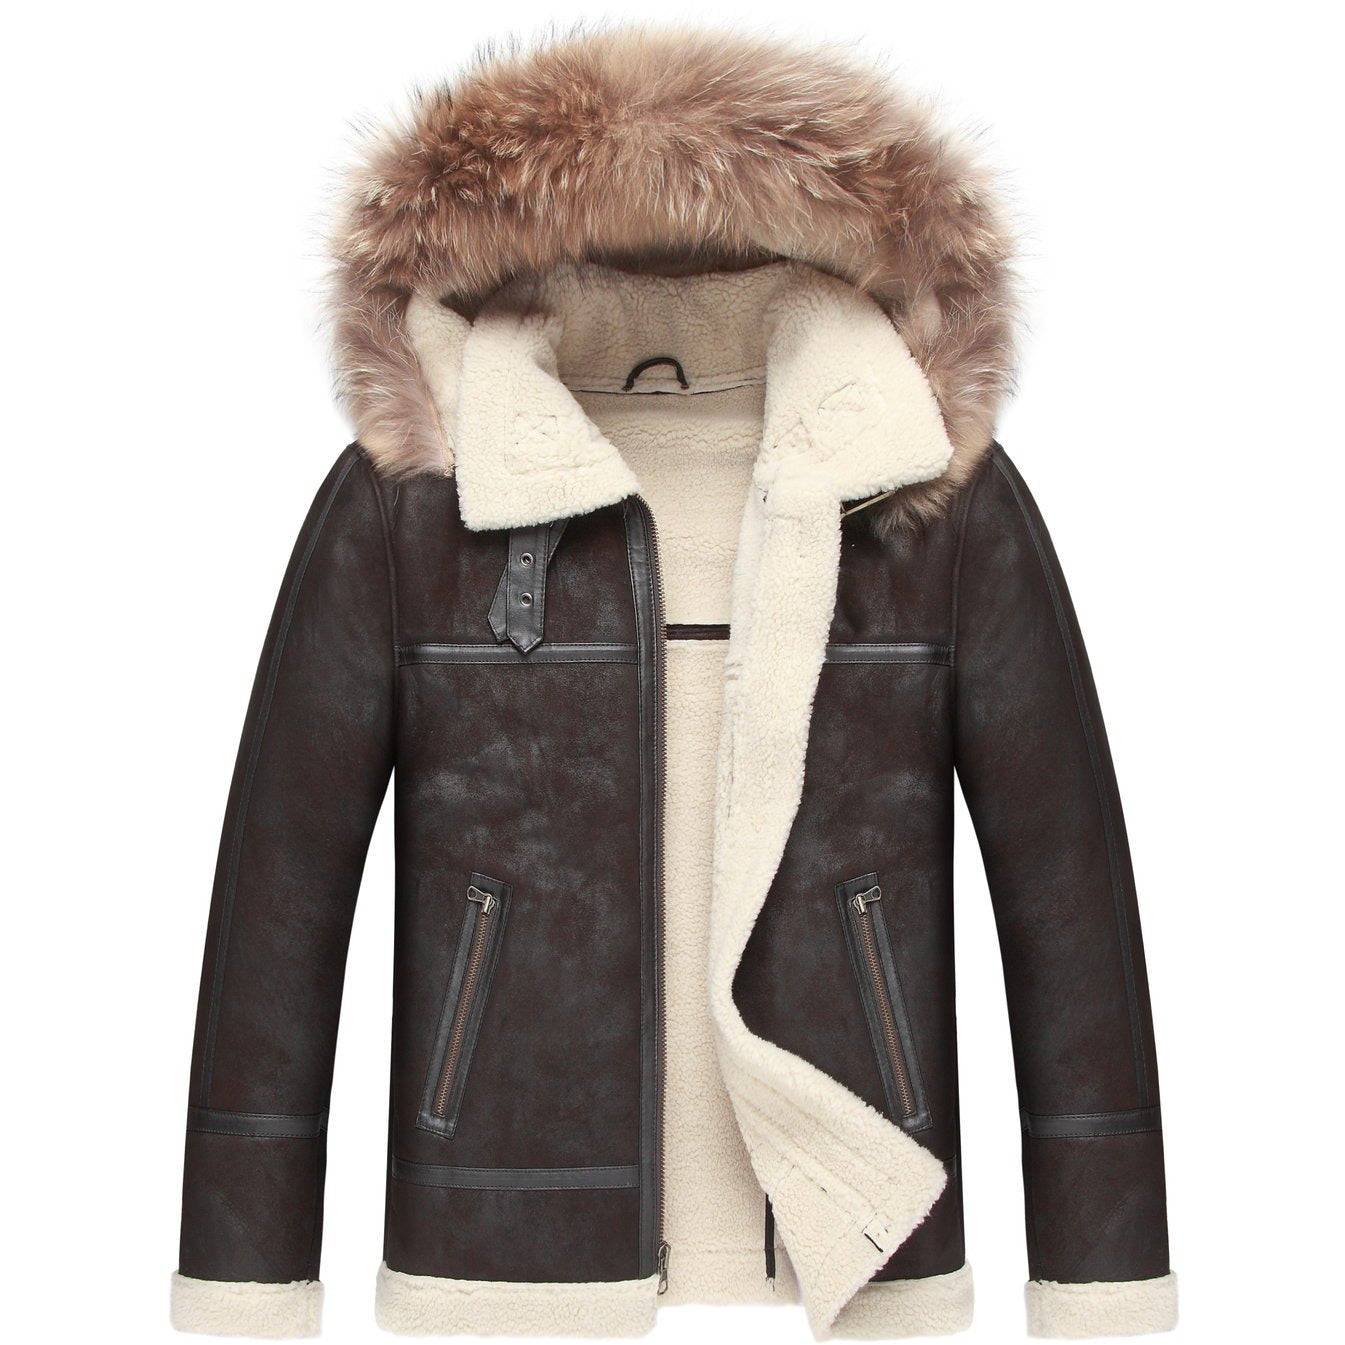 Mason & Cooper Men's B3 Faux Shearling Jacket with Zip Out hood